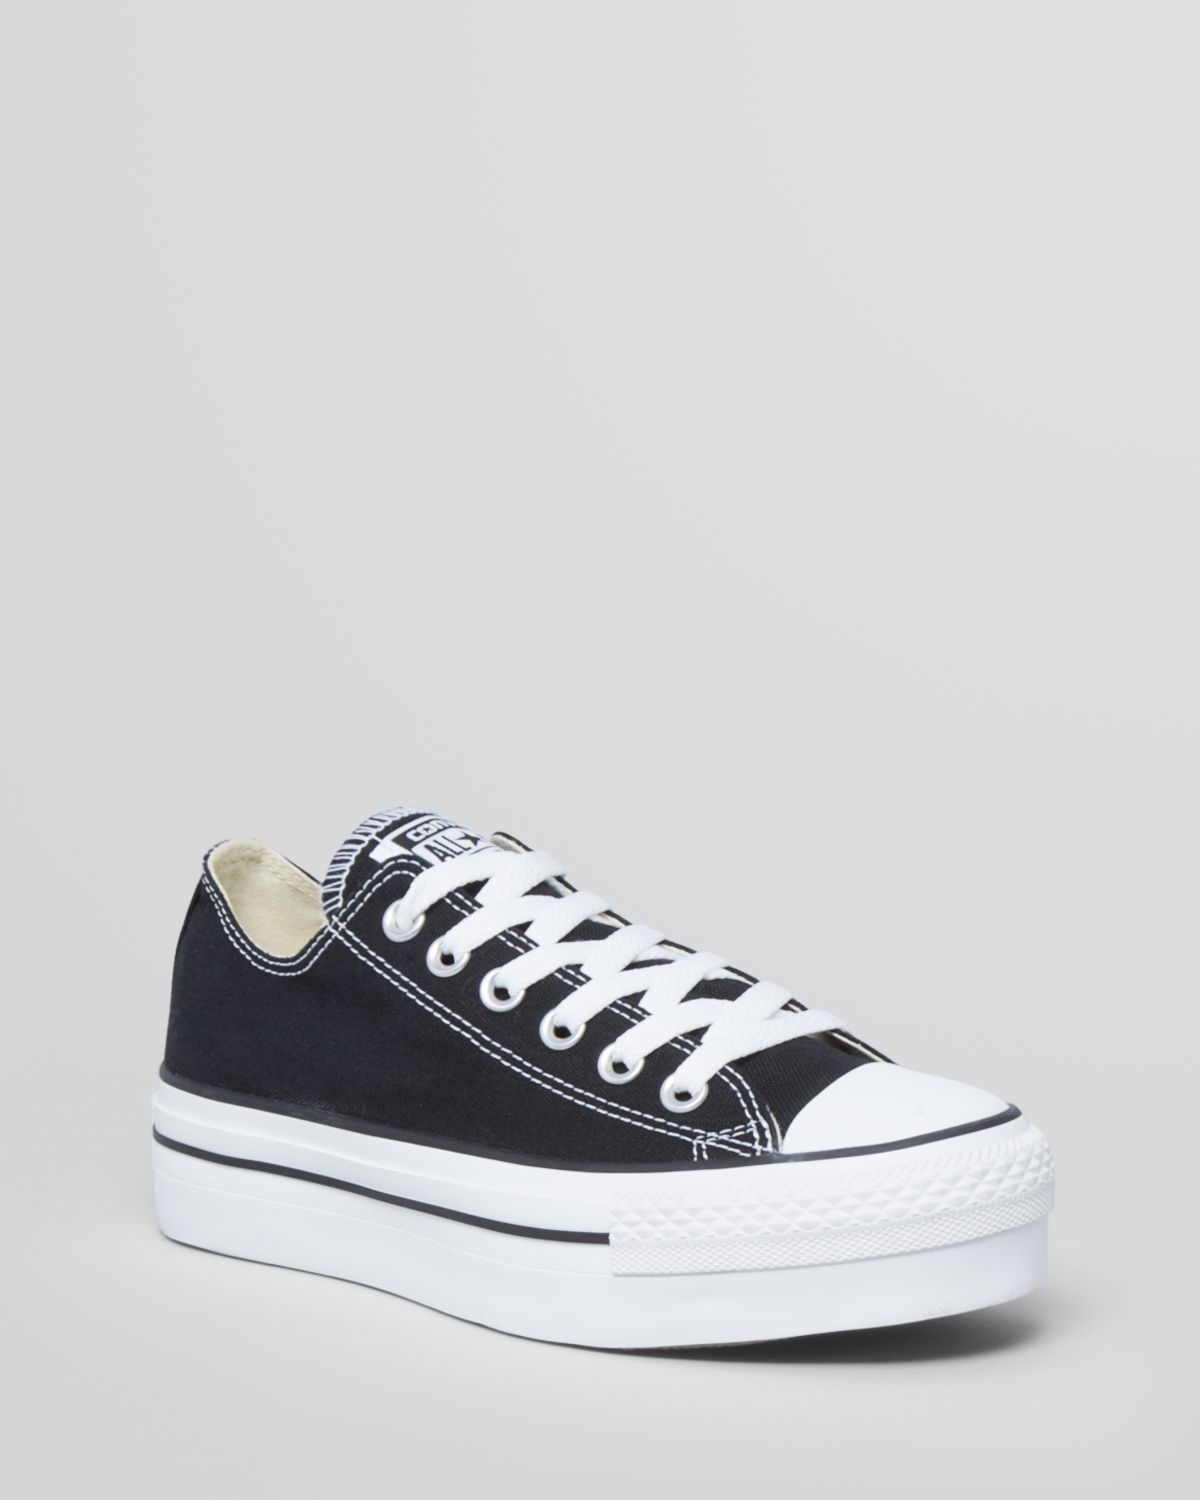 Converse Lace Up Platform Sneakers All Star in Black | Lyst